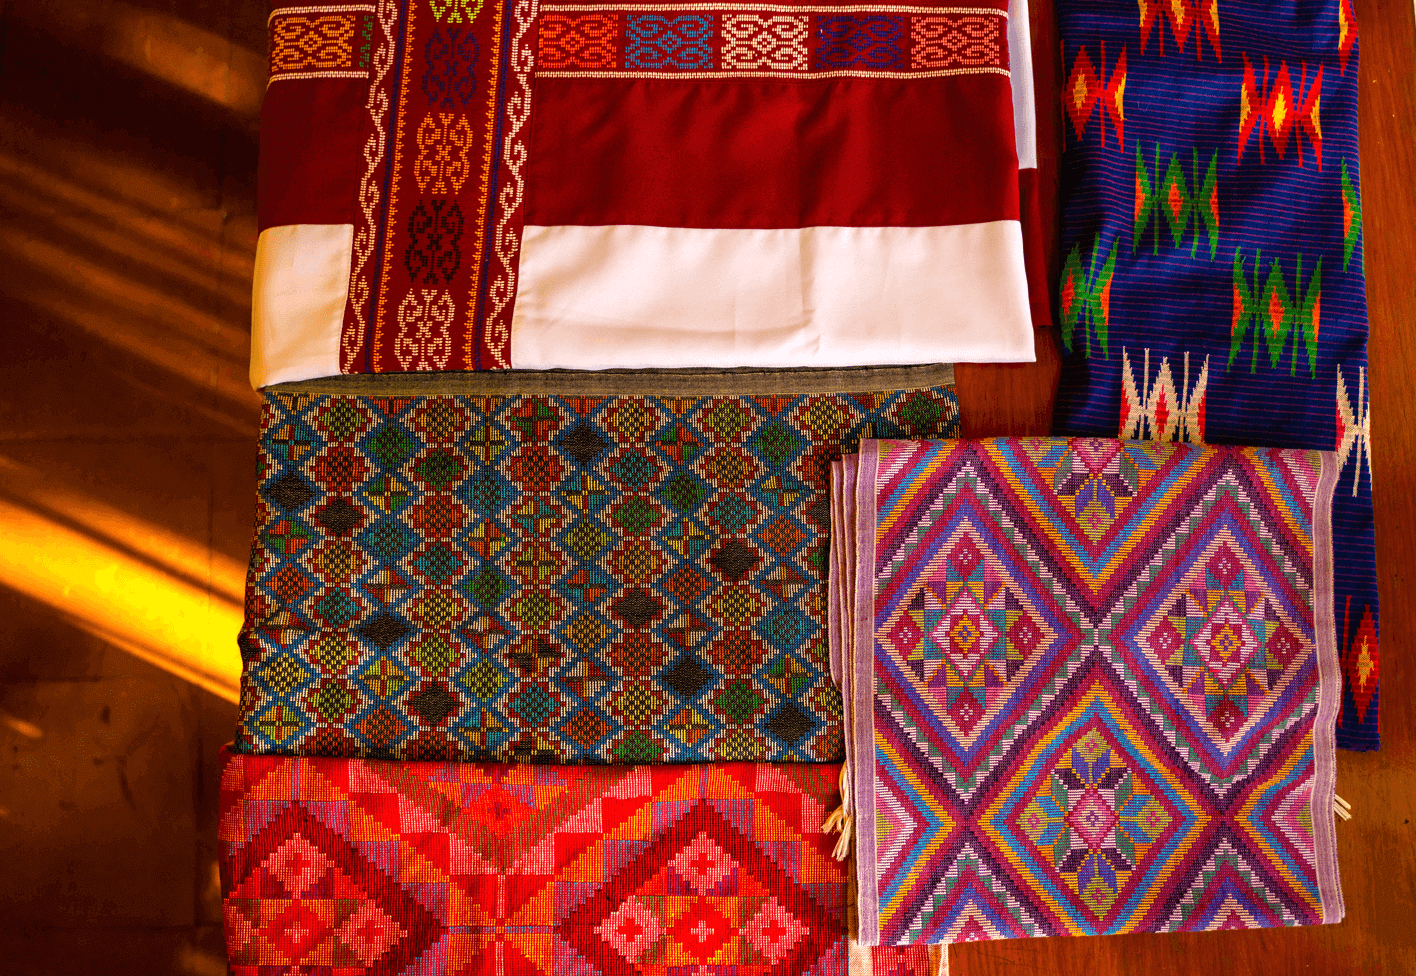 Green, purple, and red fabrics pictured at the bottom: Yakan "Seputangan" textiles; Blue fabric pictured at the right-most side: Tausug "Siyabit" textile; Red and white fabric at the top-most left: Maranao "Langkit" Malong